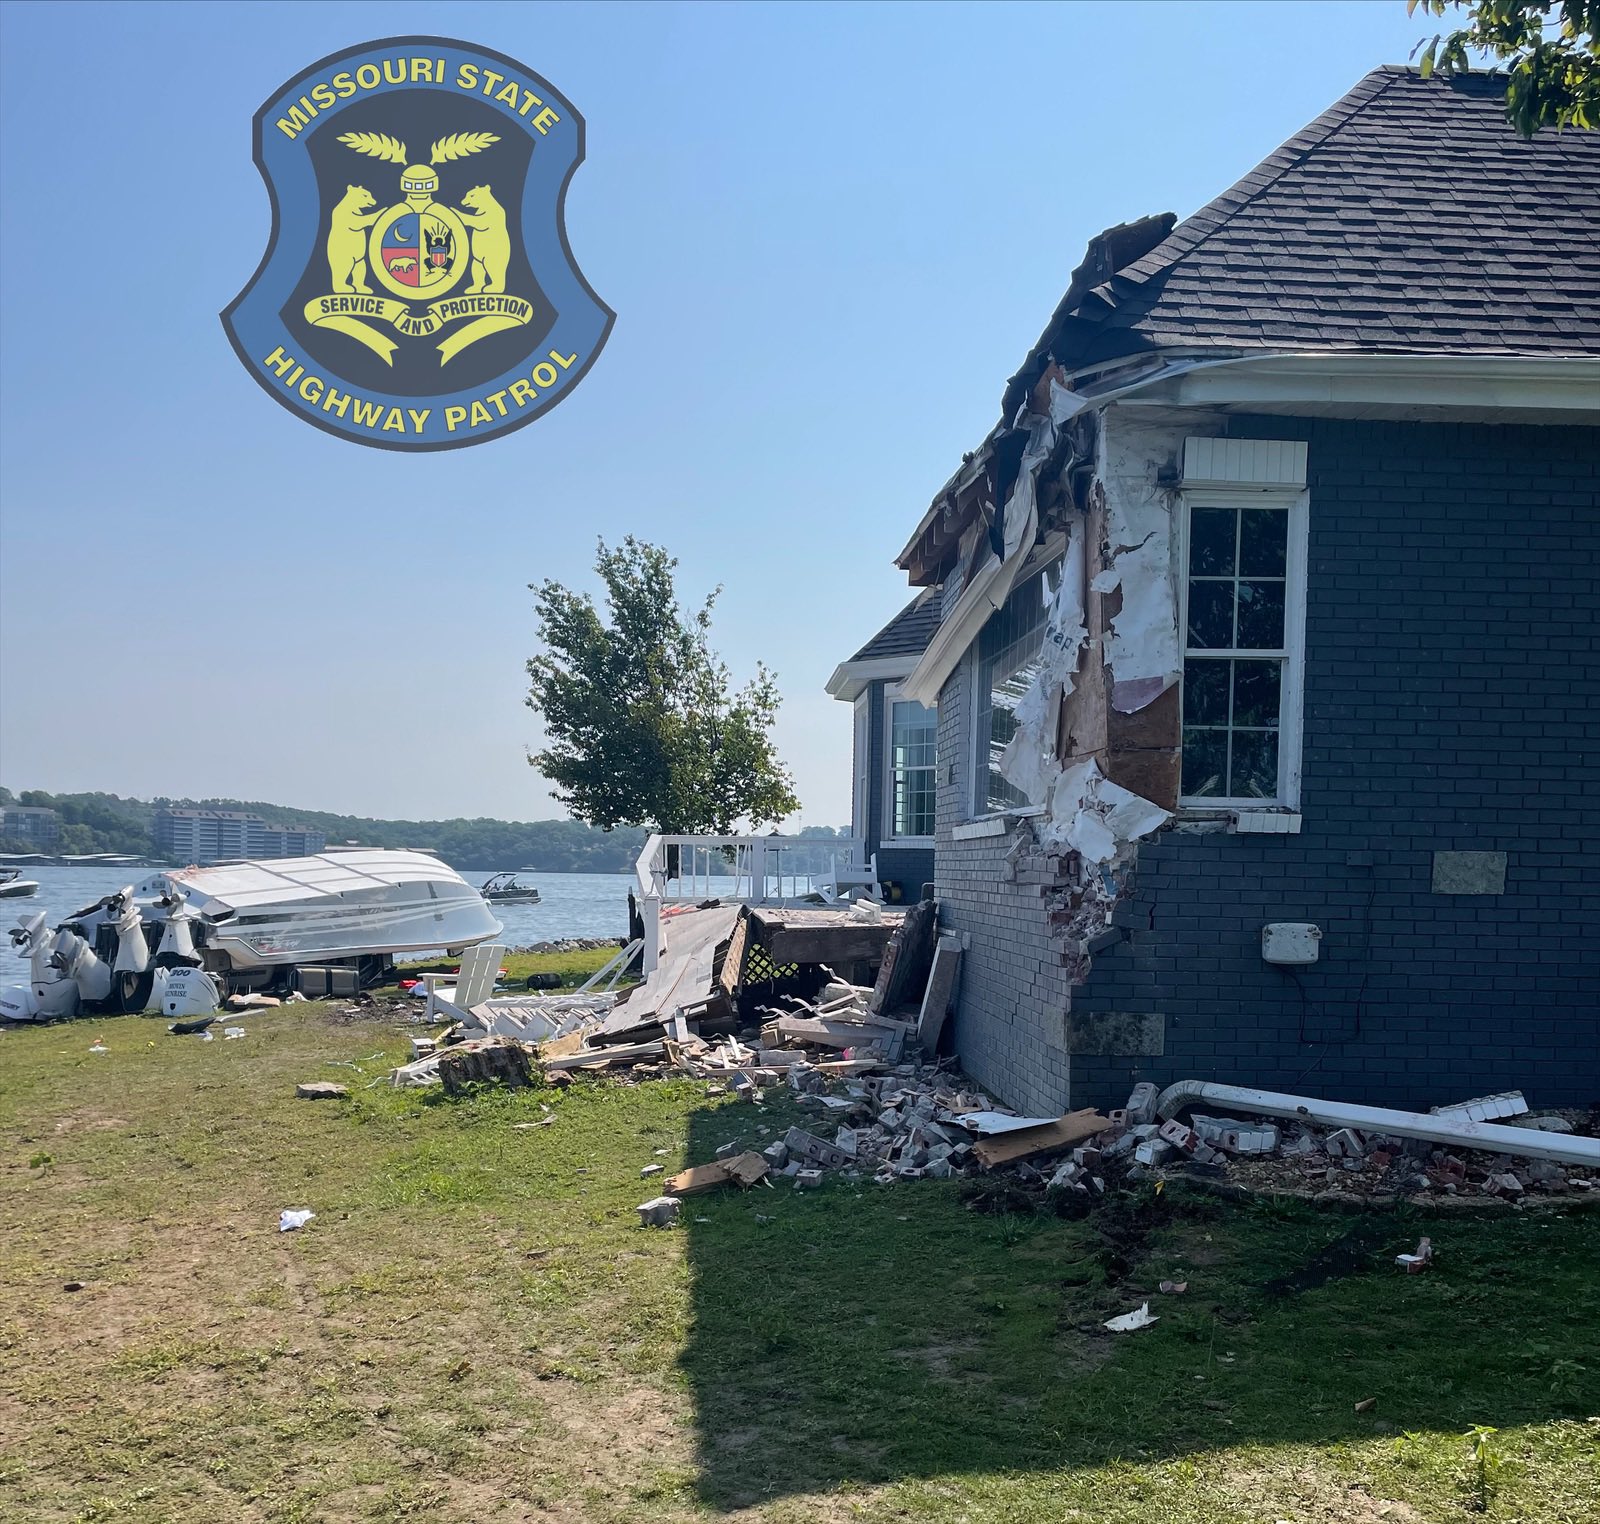 Eight people were injured after a boat ran aground at the Lake of the Ozarks and crashed into a home on Saturday, July 22, 2023, according to the Missouri State Highway Patrol.